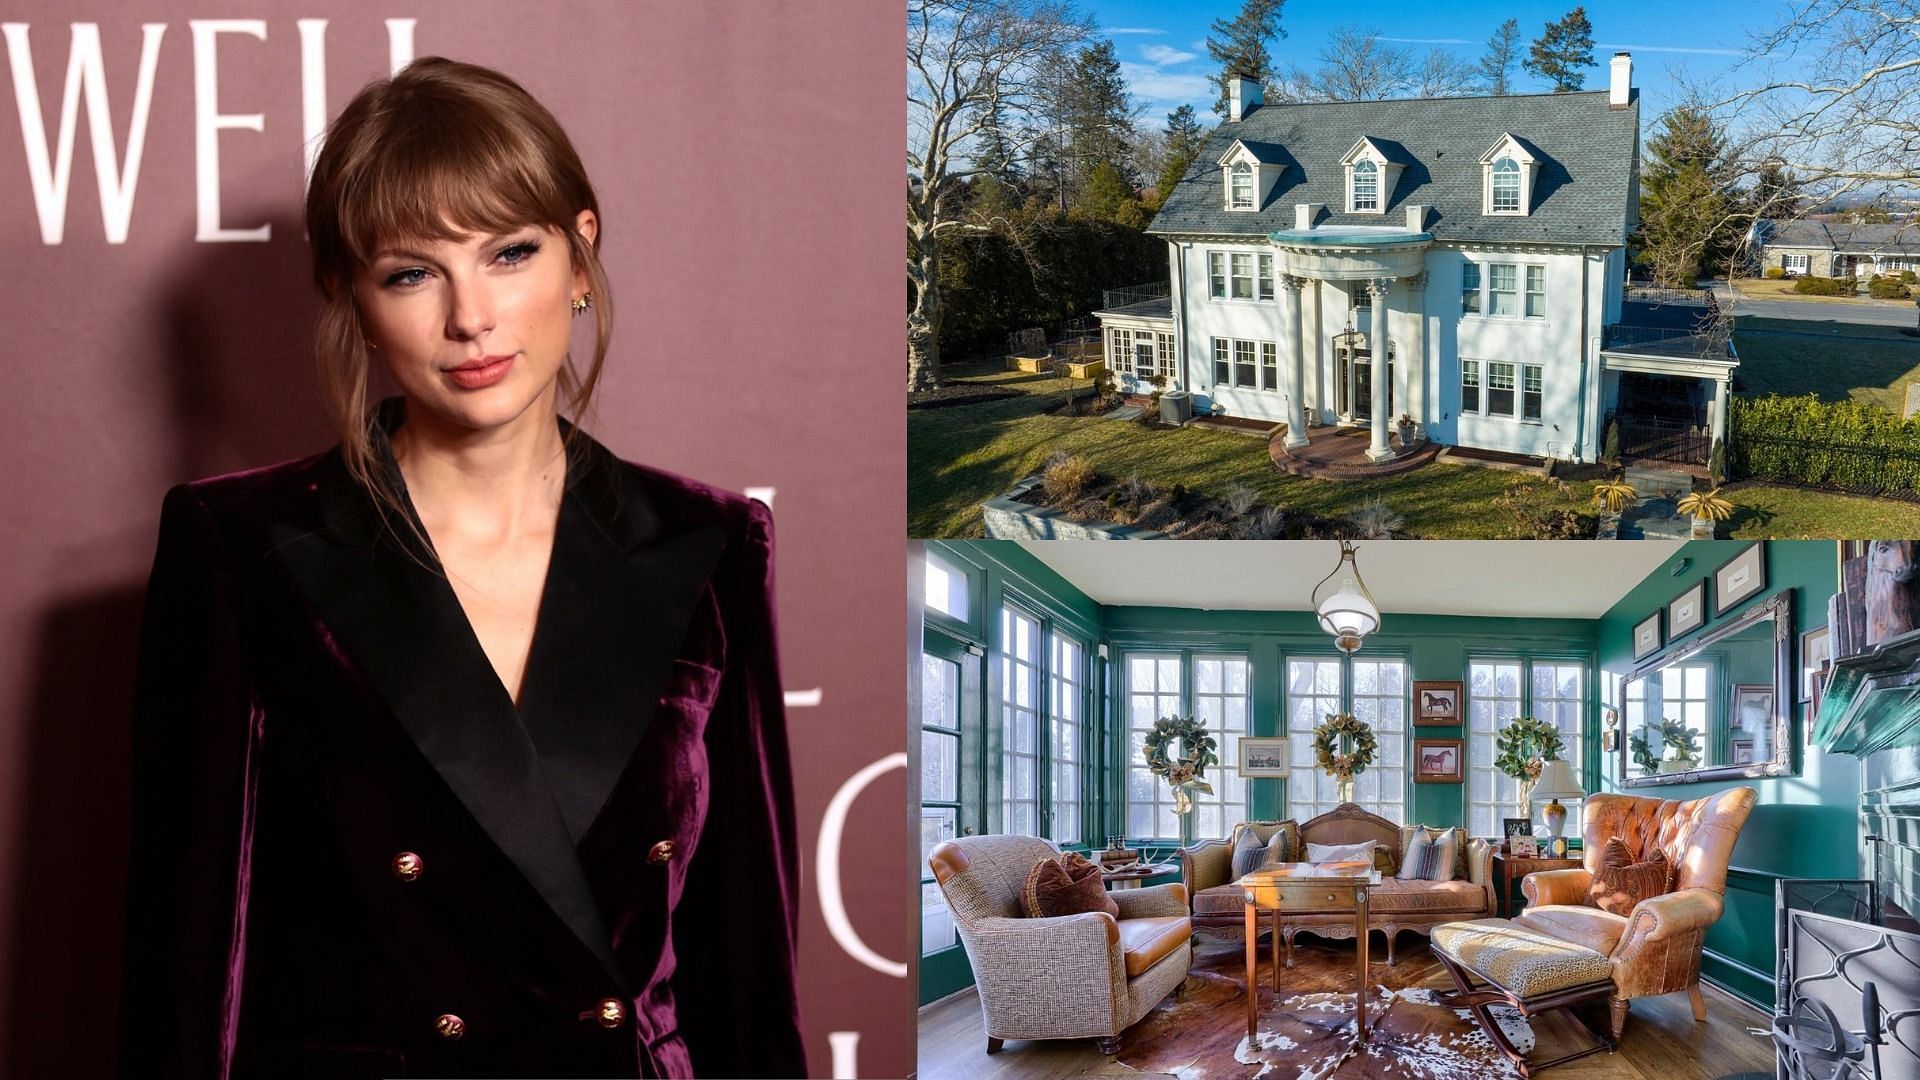 Taylor Swift&#039;s childhood home in Wyomissing, Pennsylvania, goes on sale for $1 million (Images via Dimitrios Kambouris/Getty Images &amp; Redfin)